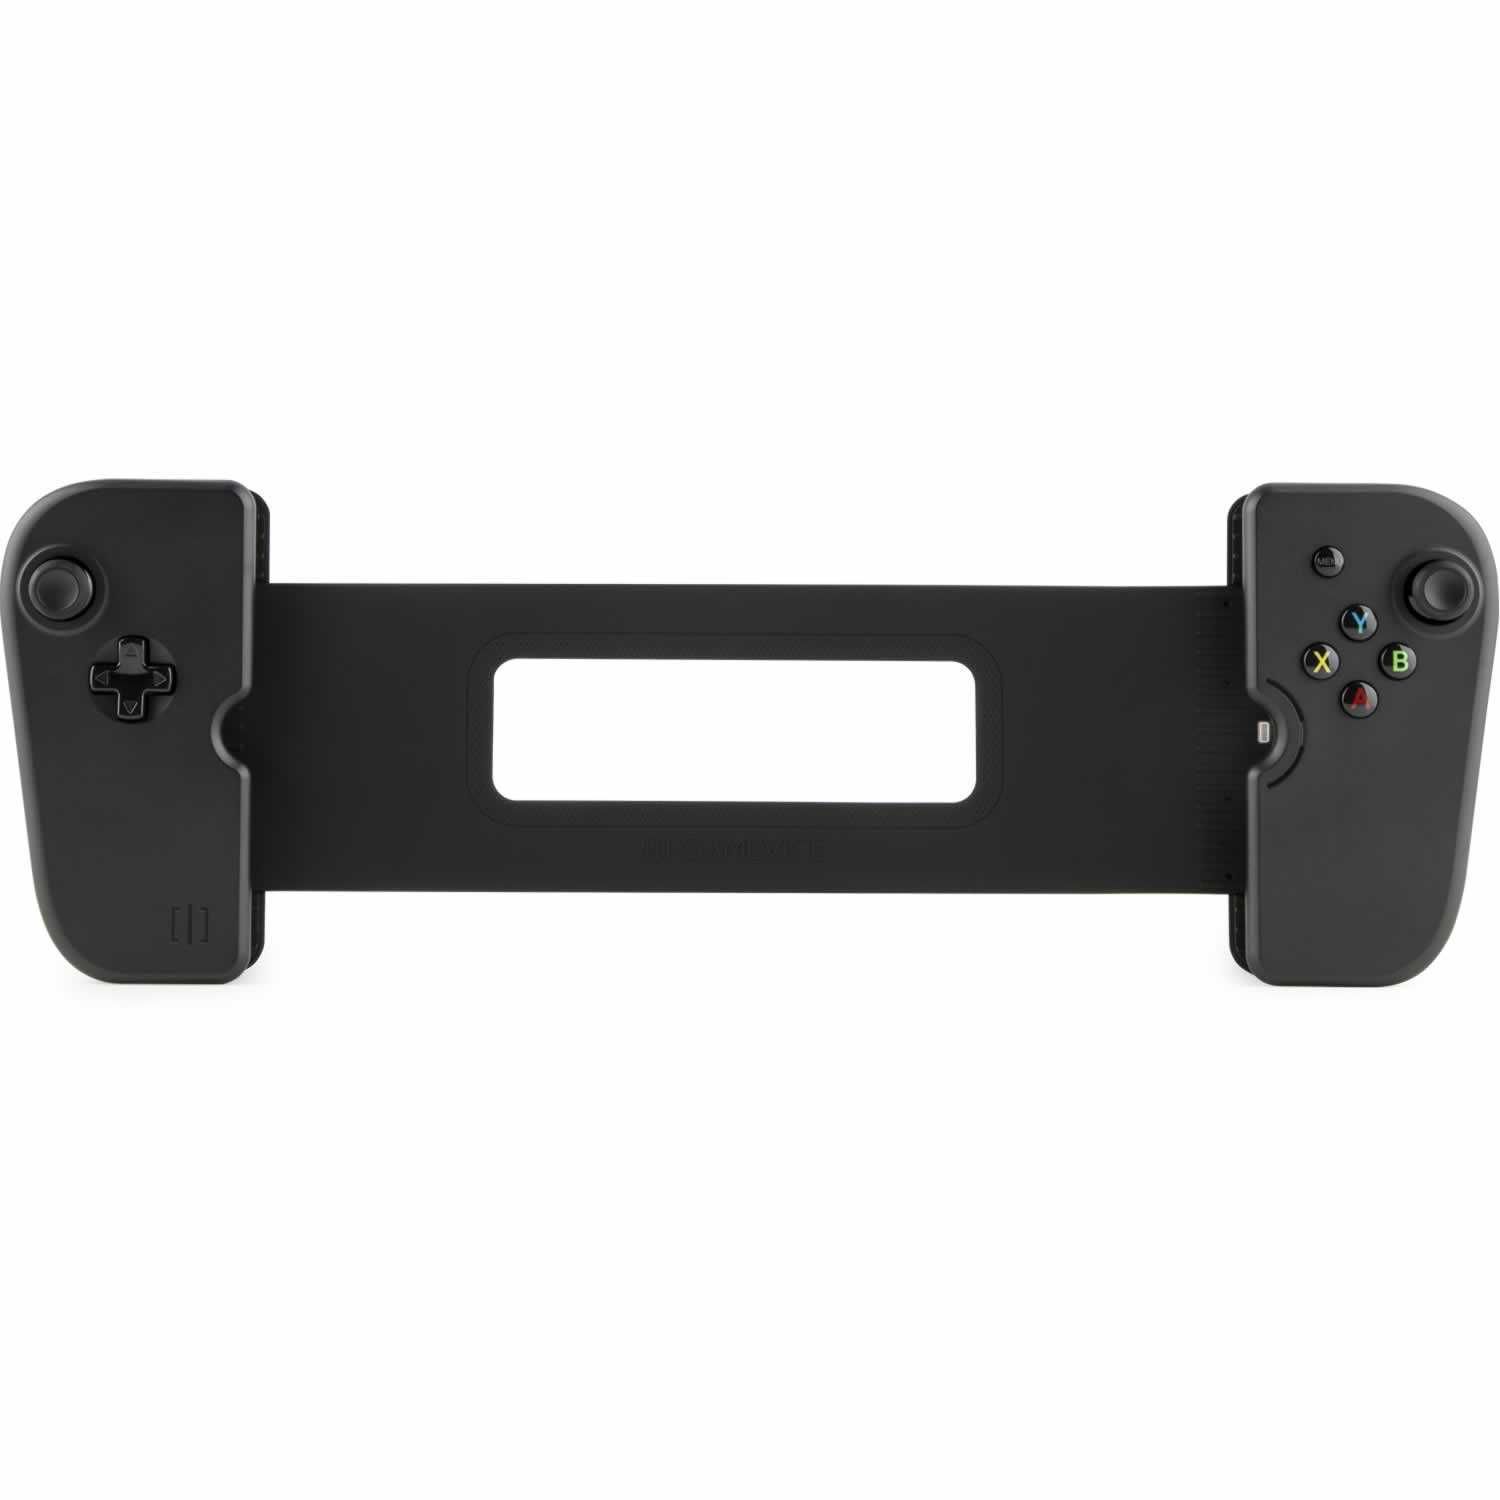 Gamevice Controller for IPad Pro 12.9